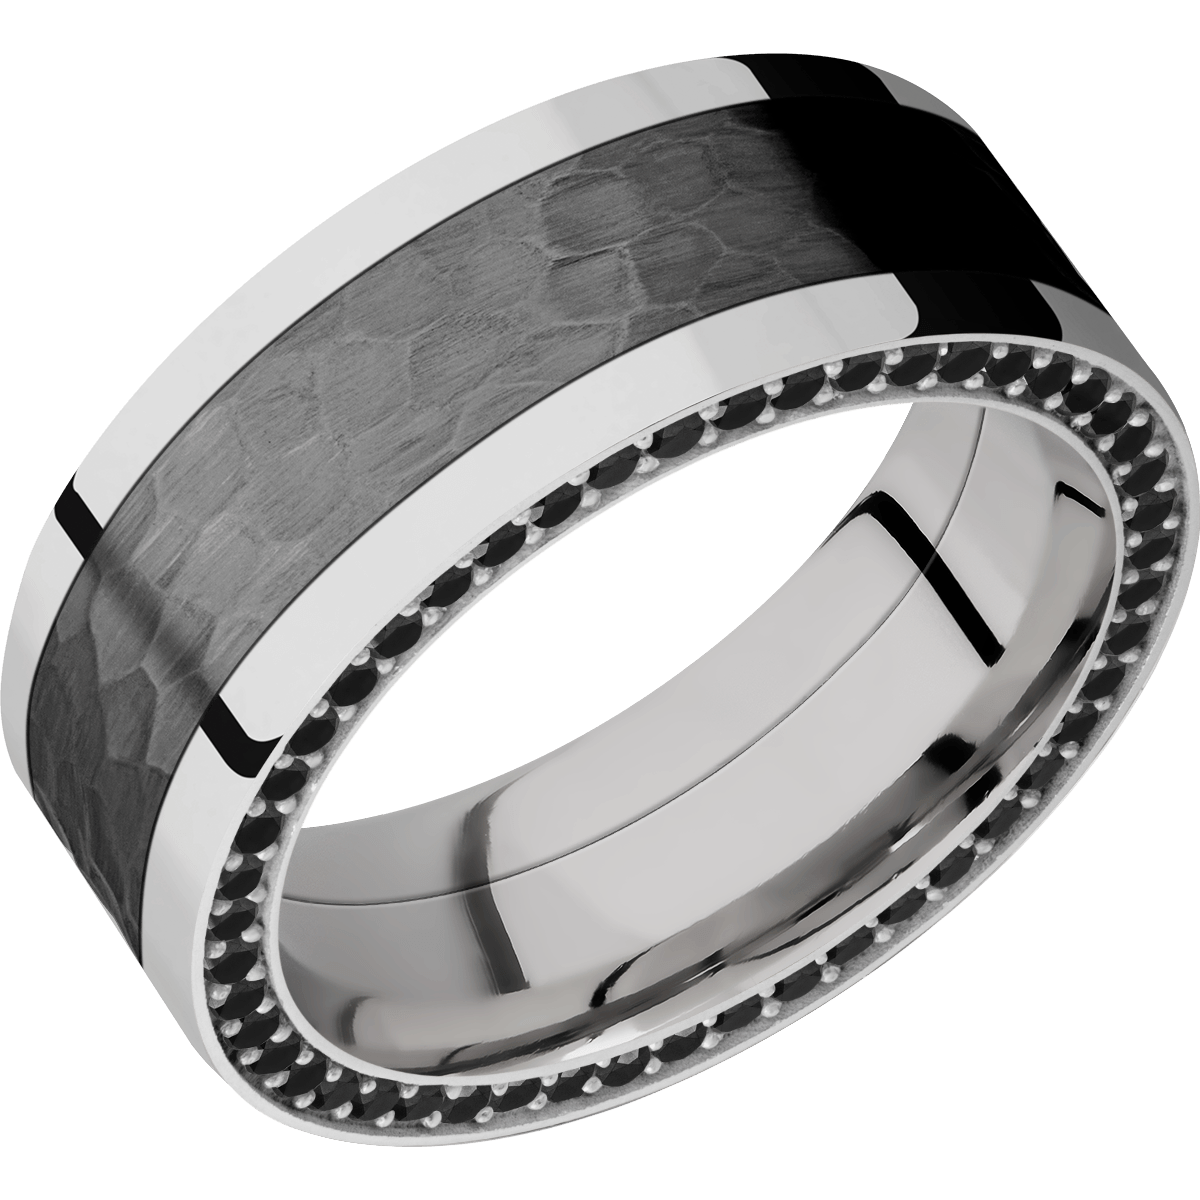 14k white gold press fit 7mm wide flat band that has one inlay that is 5mm wide of black zirconium.